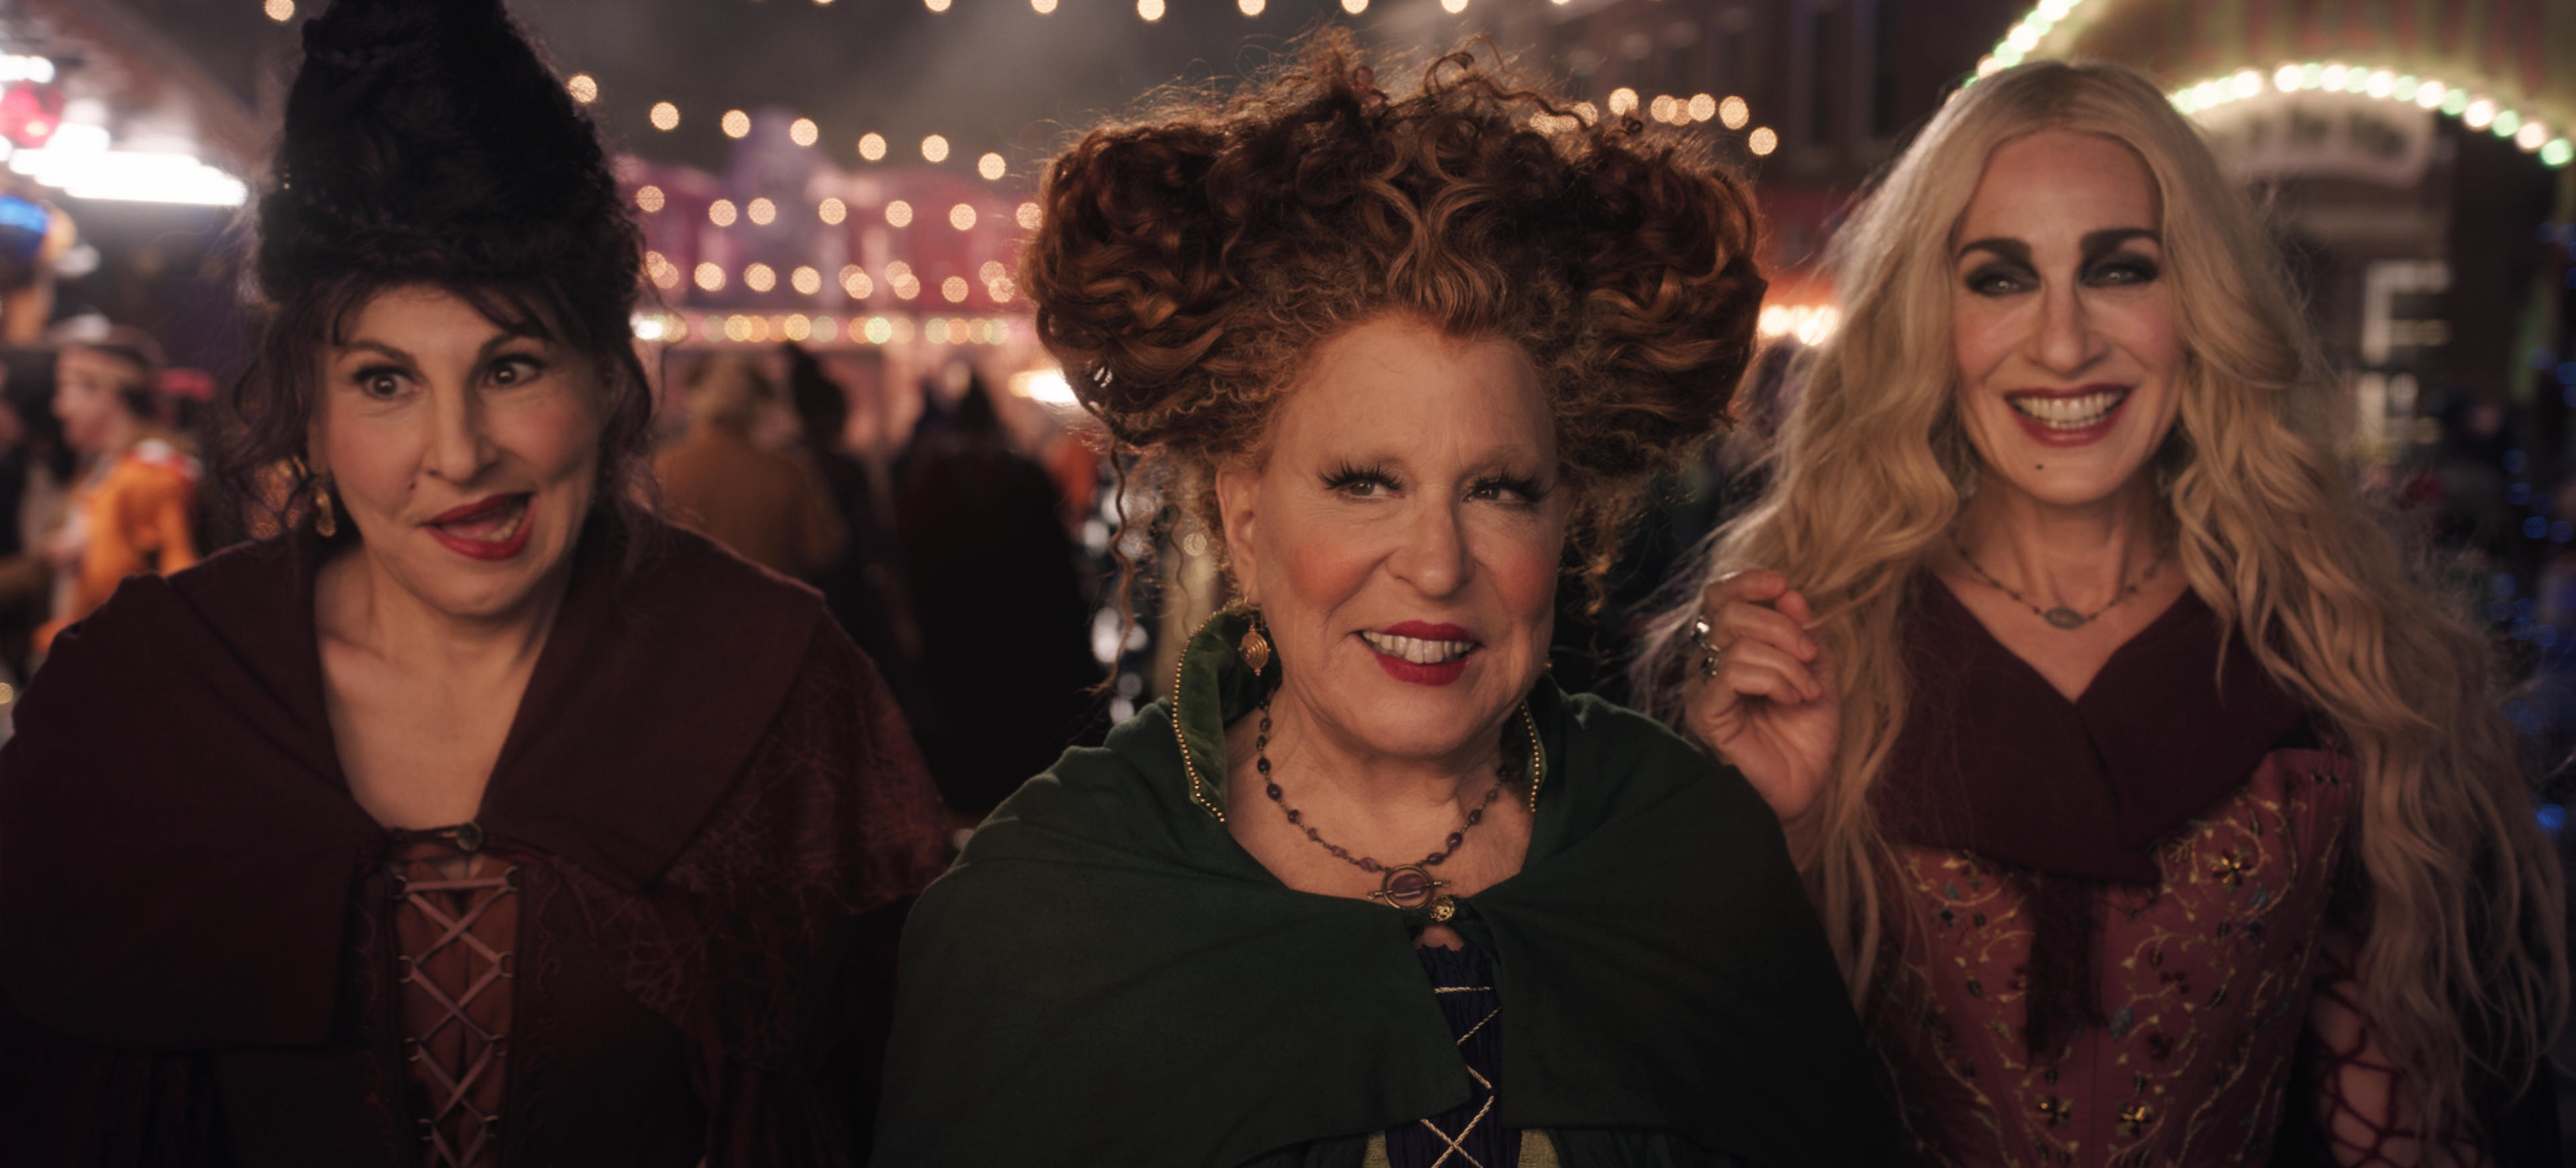 How to watch the new hocus pocus 